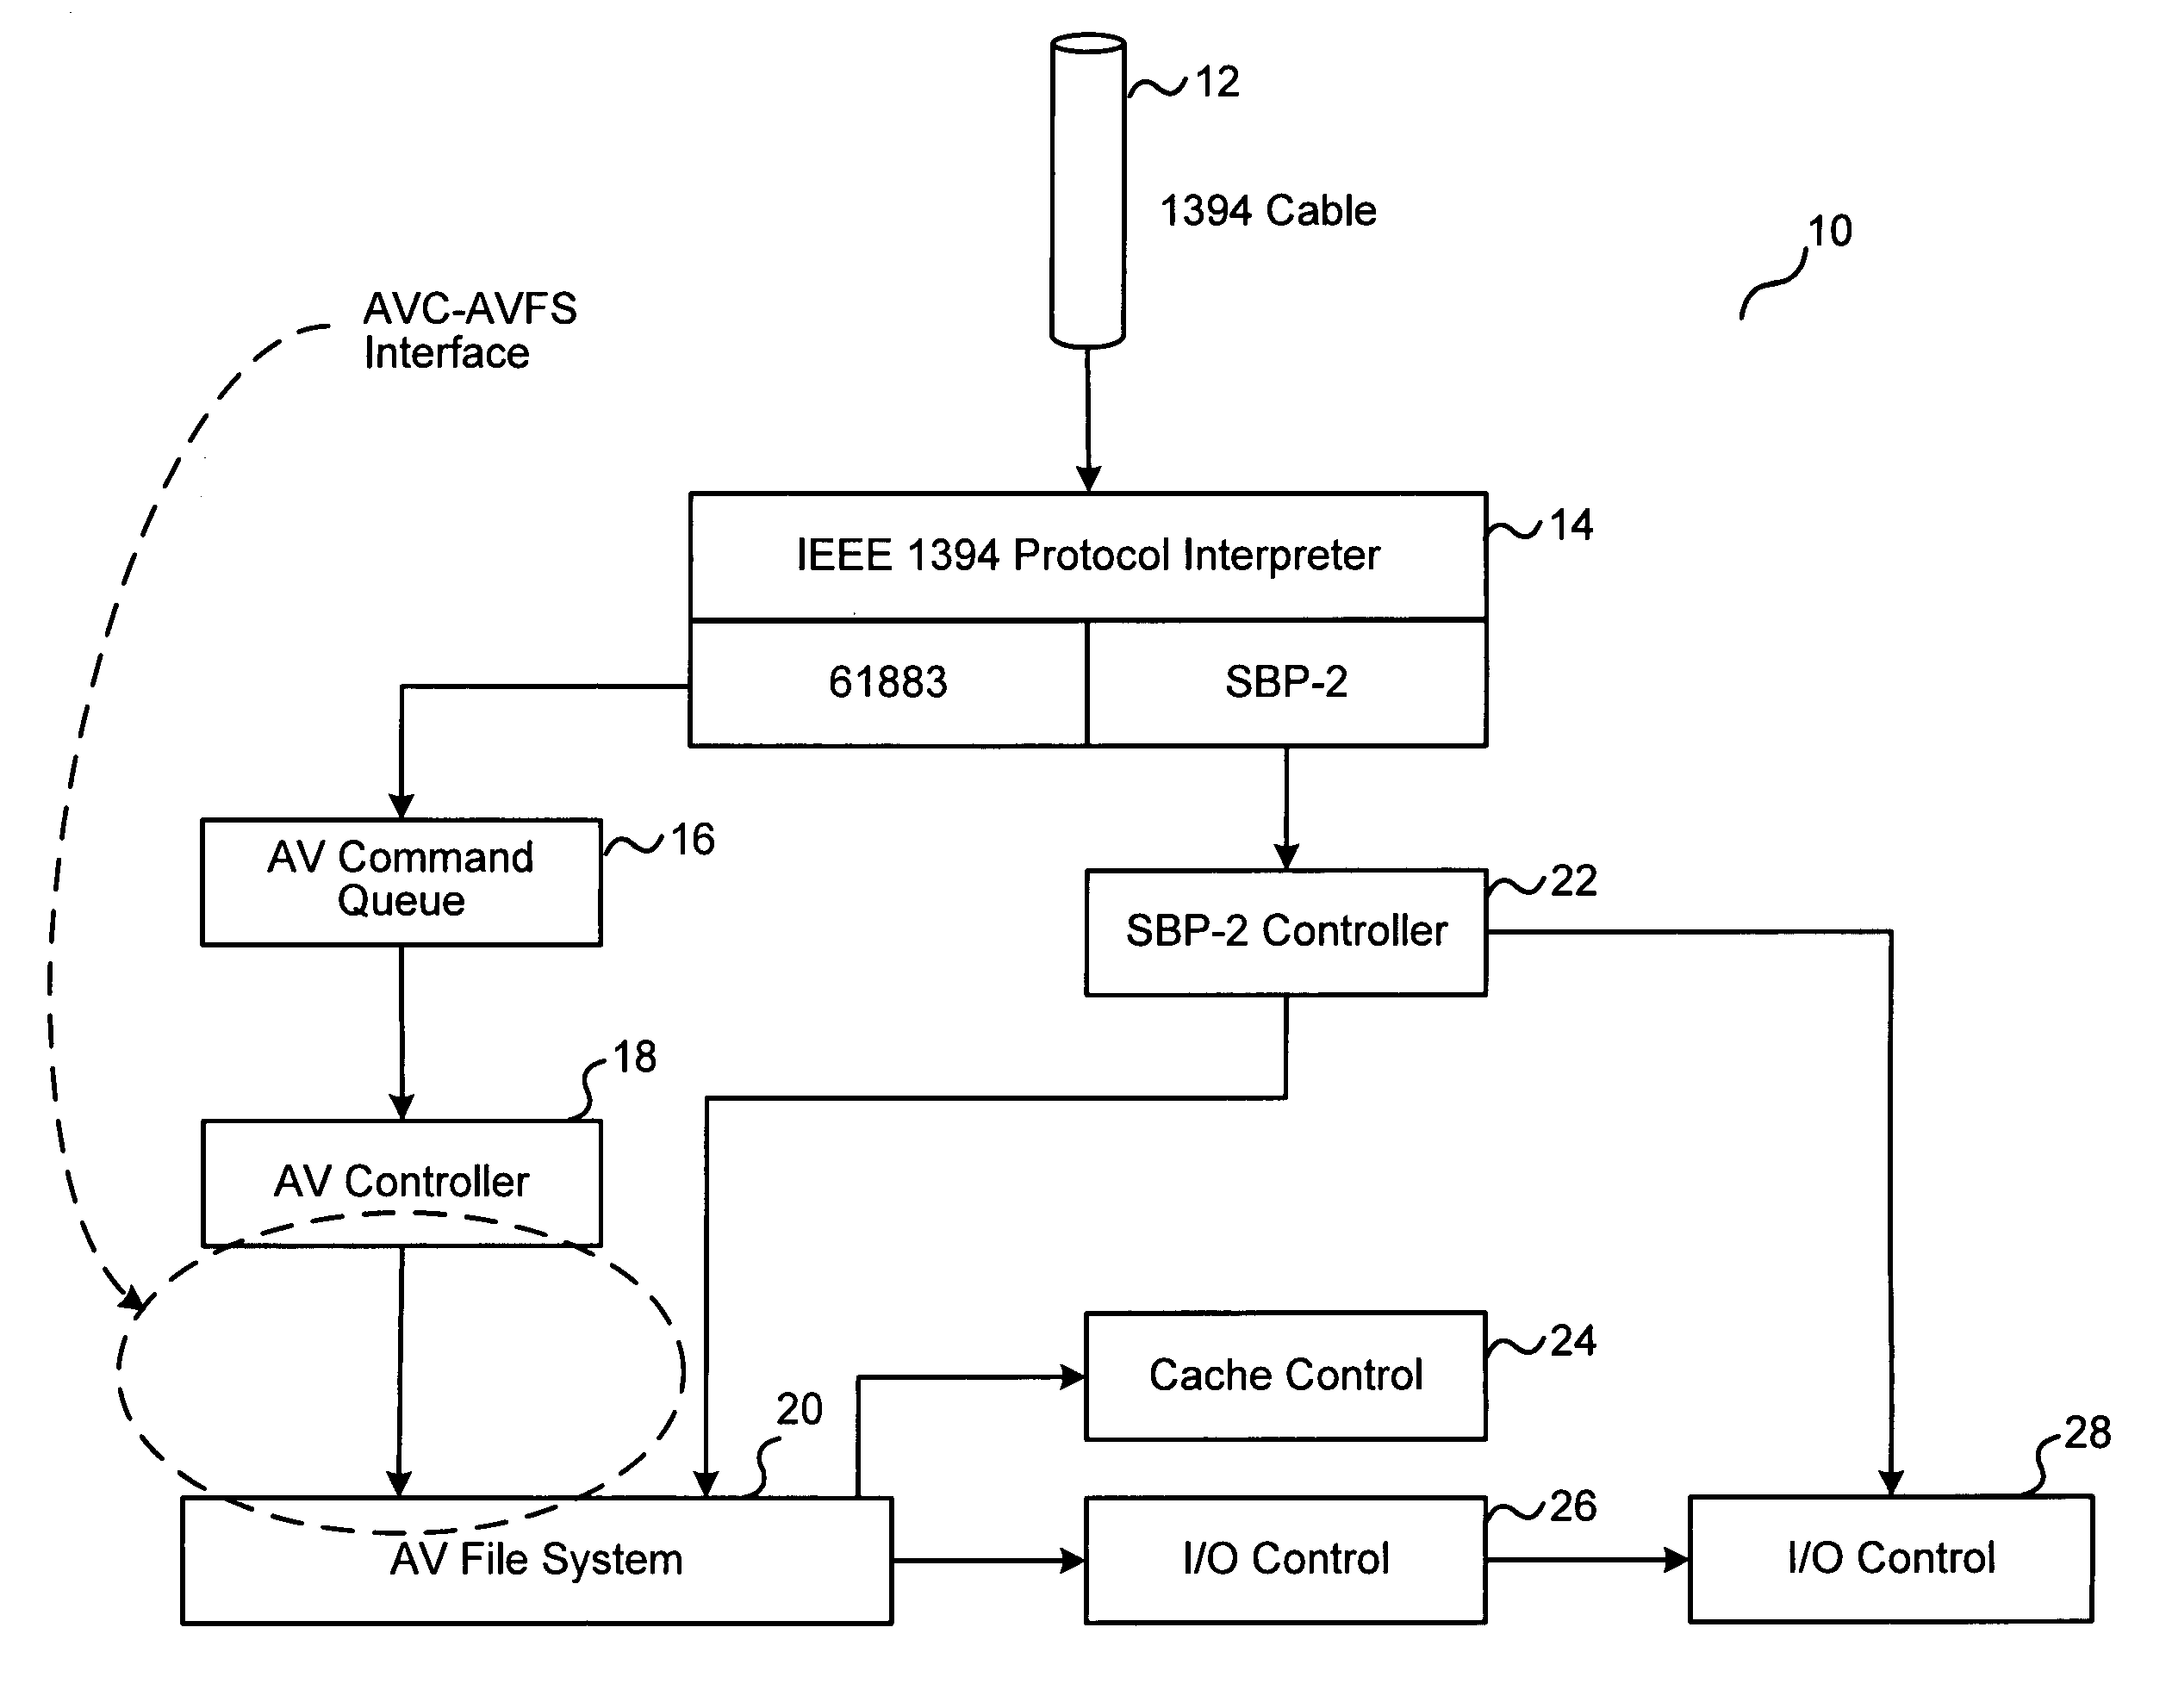 Application programming interface for communication between audio/video file system and audio video controller